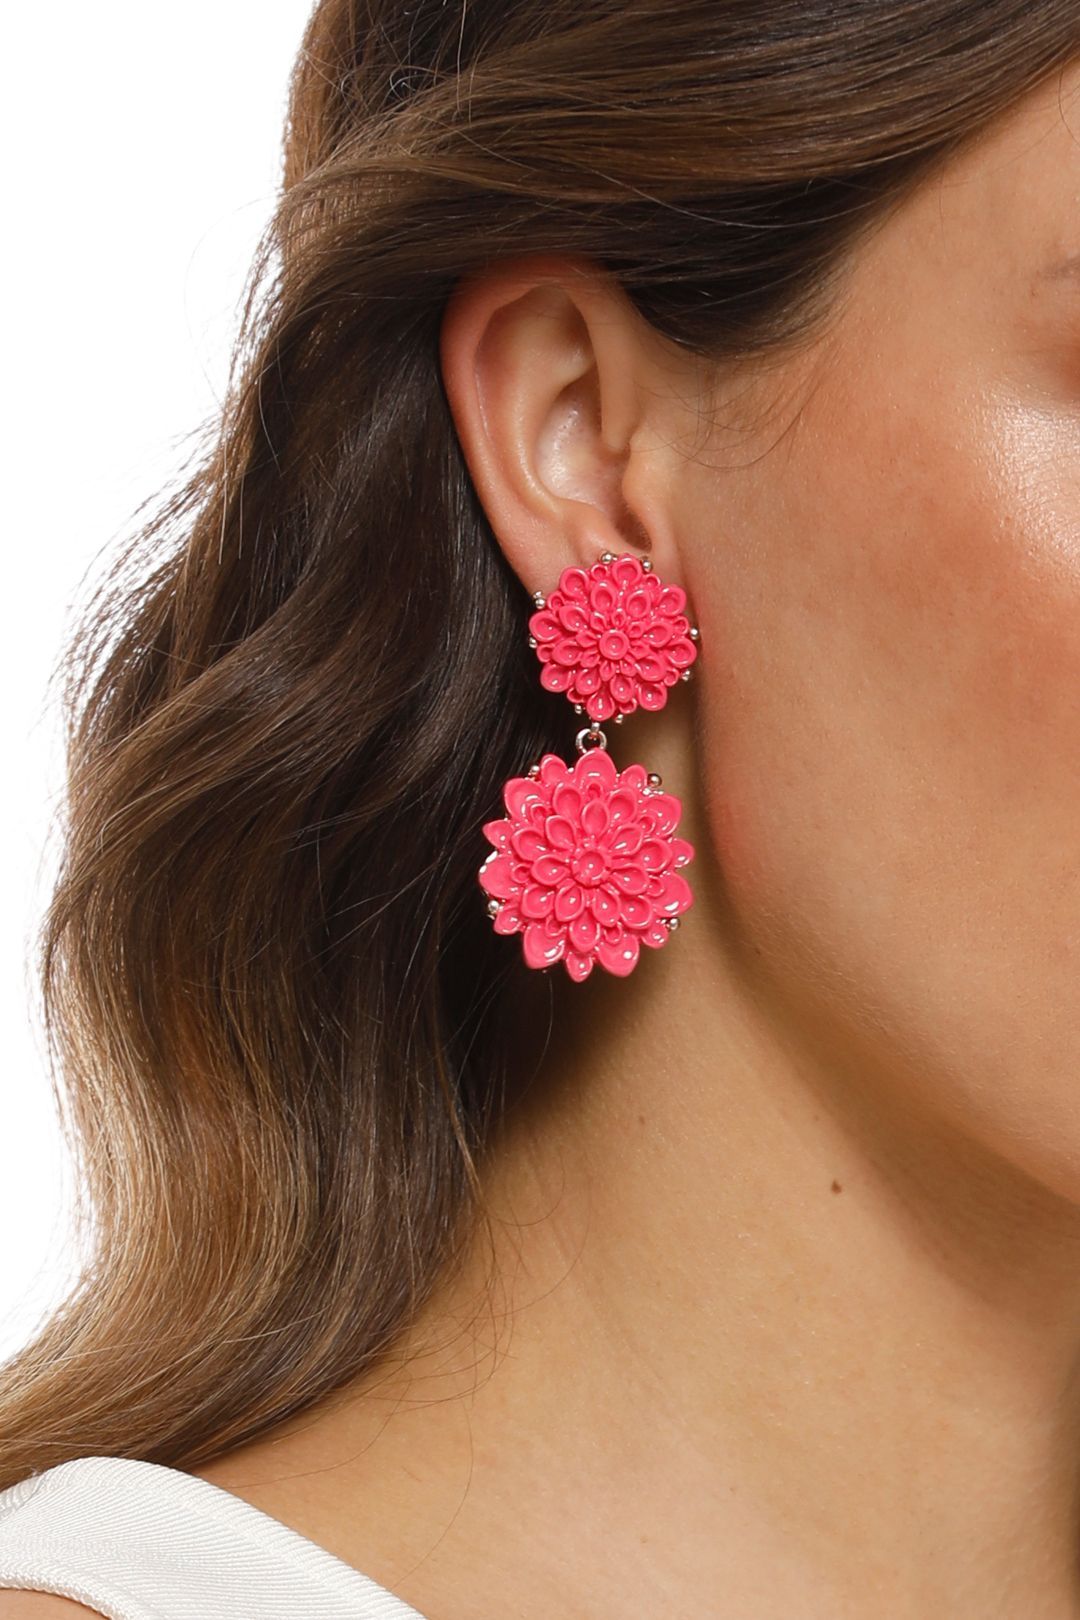 Adorne - Double Flowers Stud Earrings - Pink Rose - Product